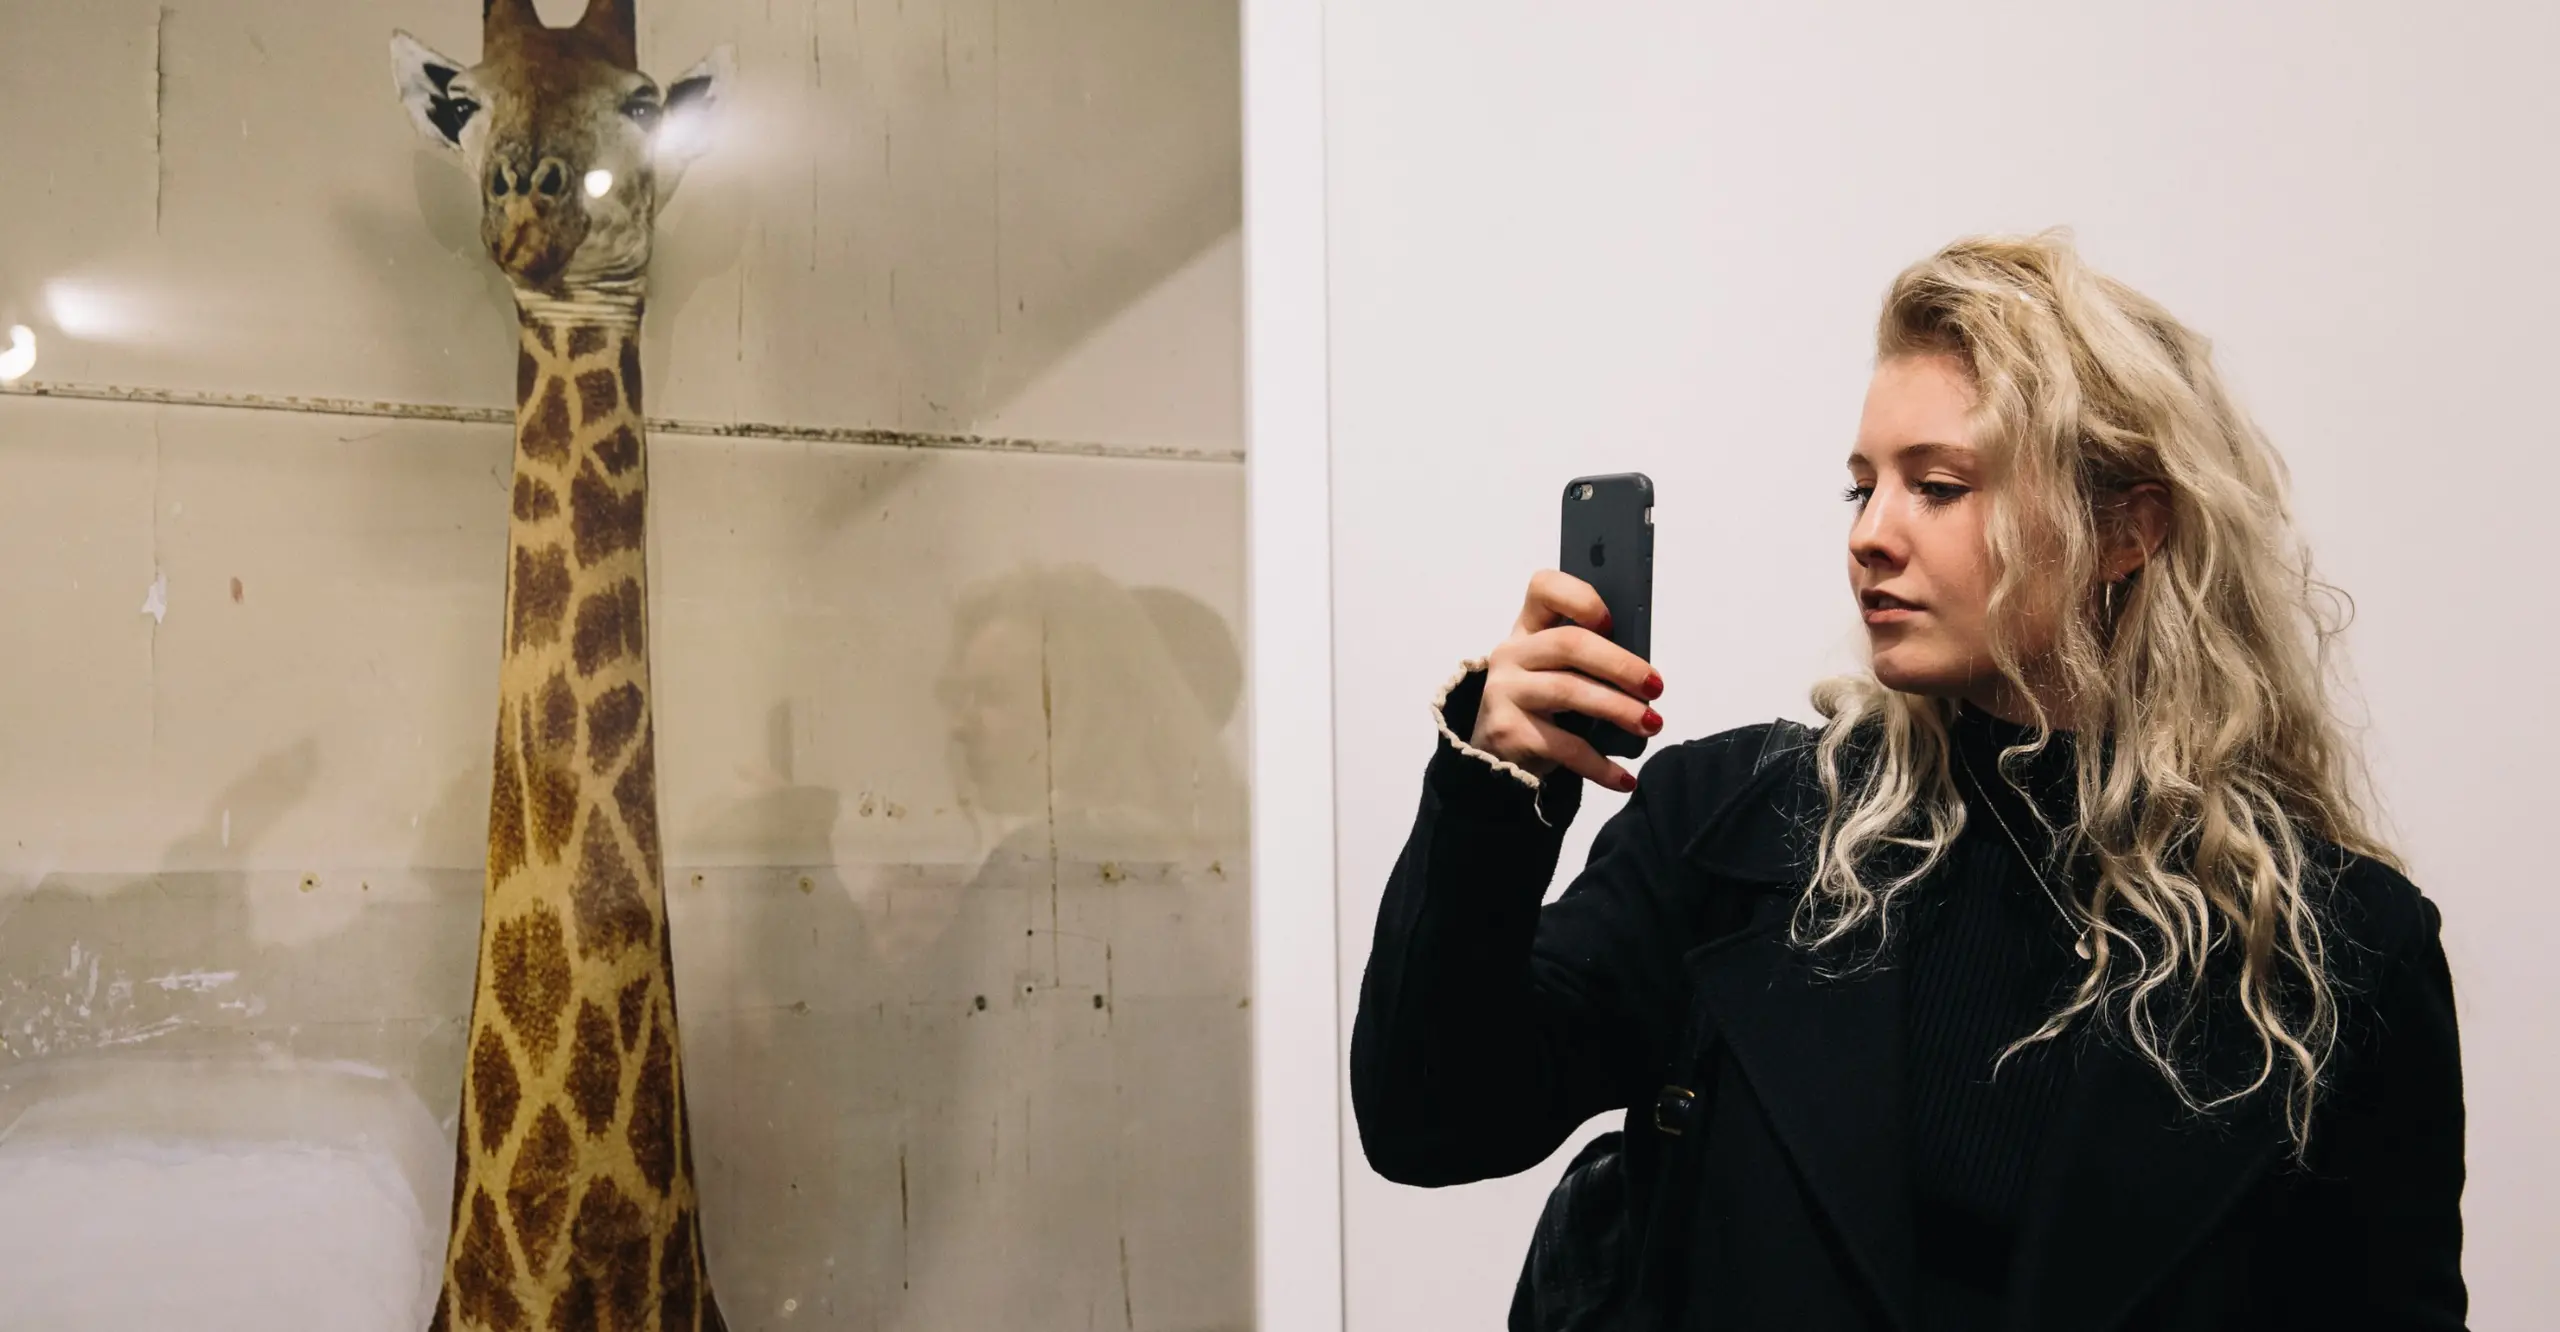 A woman takes a photo of her phone next to a photograph of a giraffe